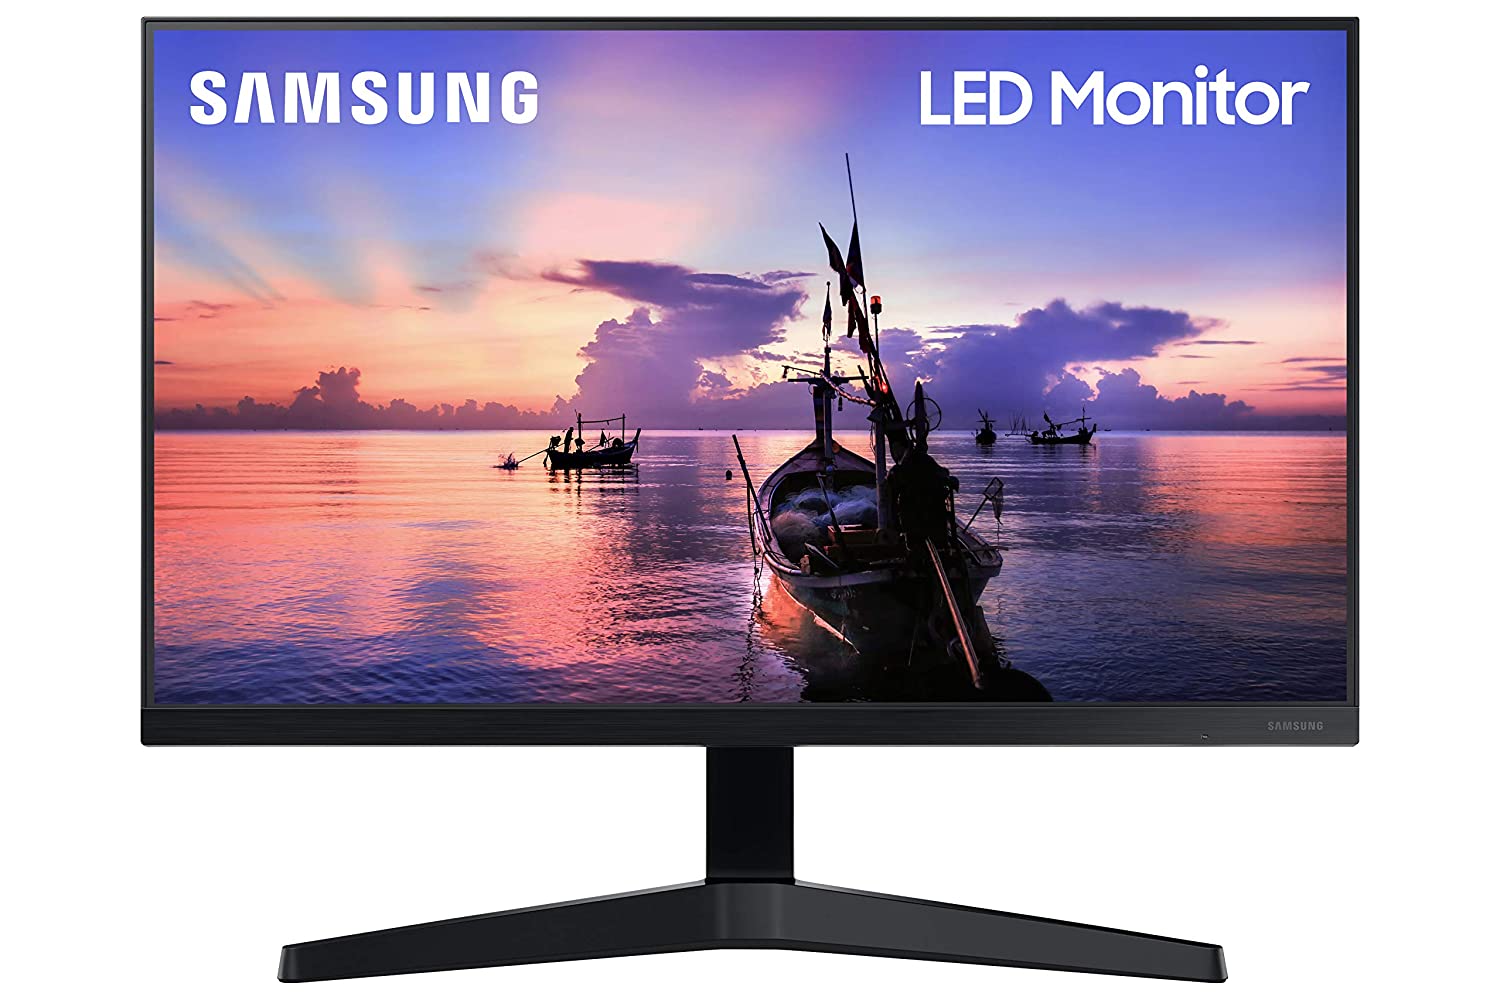 Samsung 24 inch gaming - Best monitors in India under 10000 2021